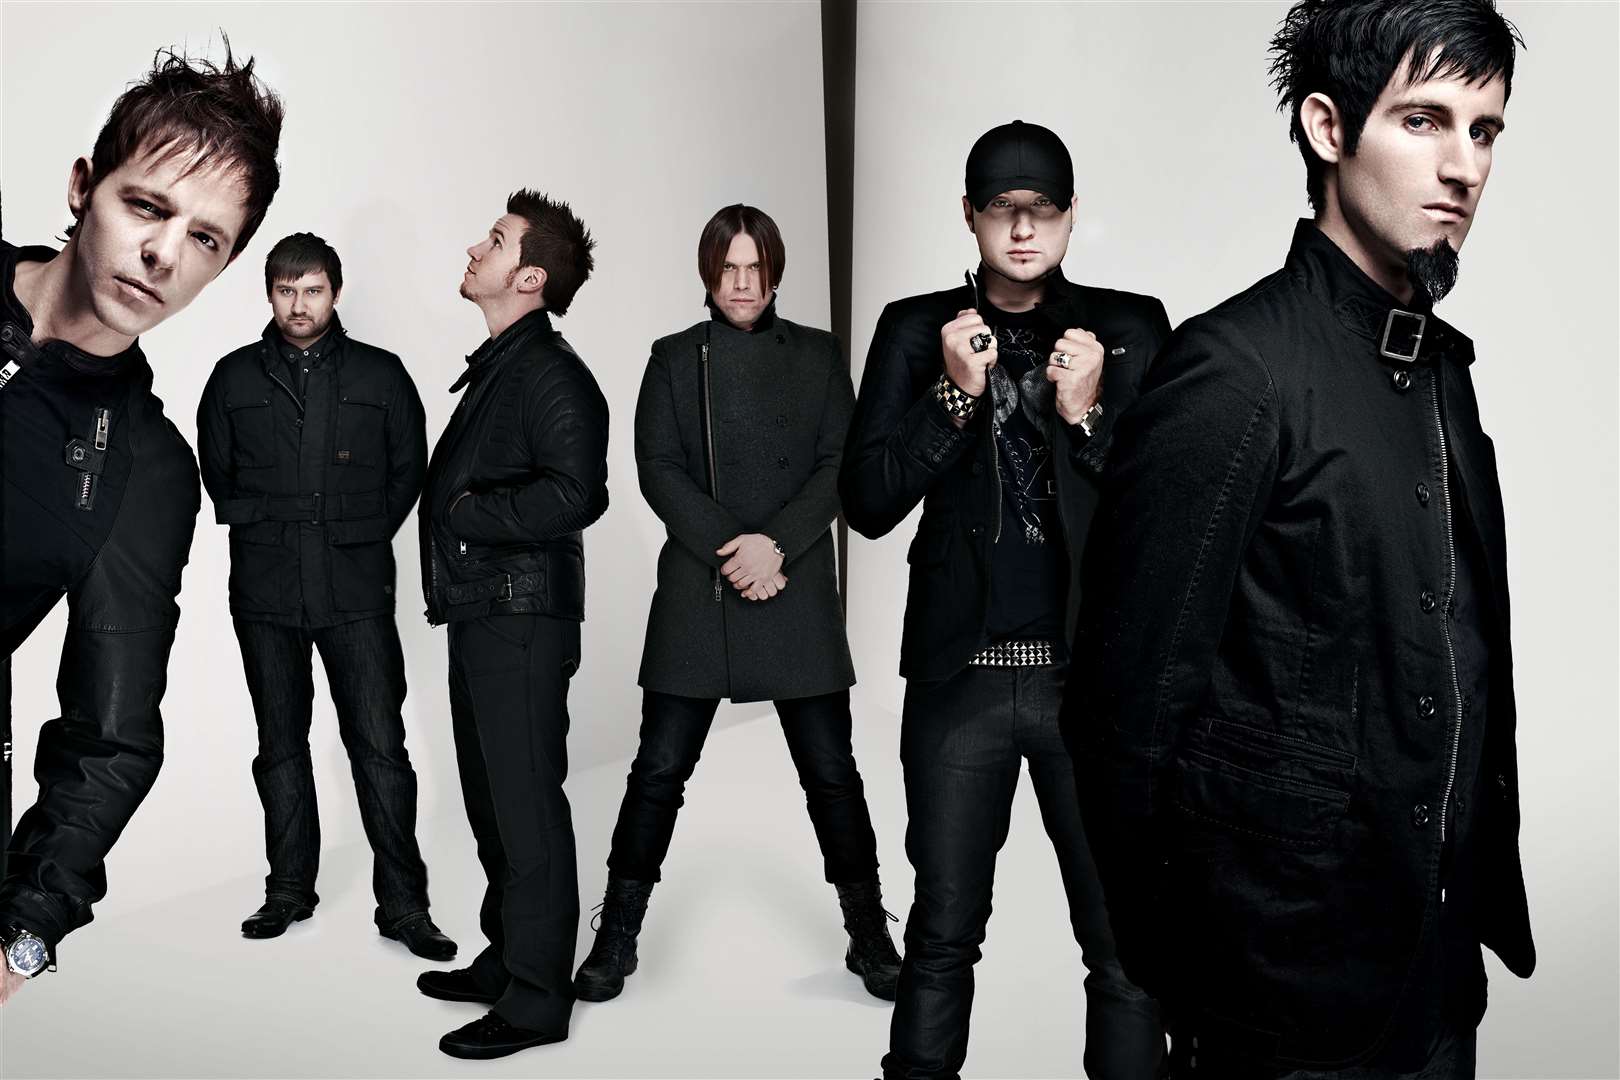 Pendulum will play a DJ set at Dreamland's Hall by the Sea